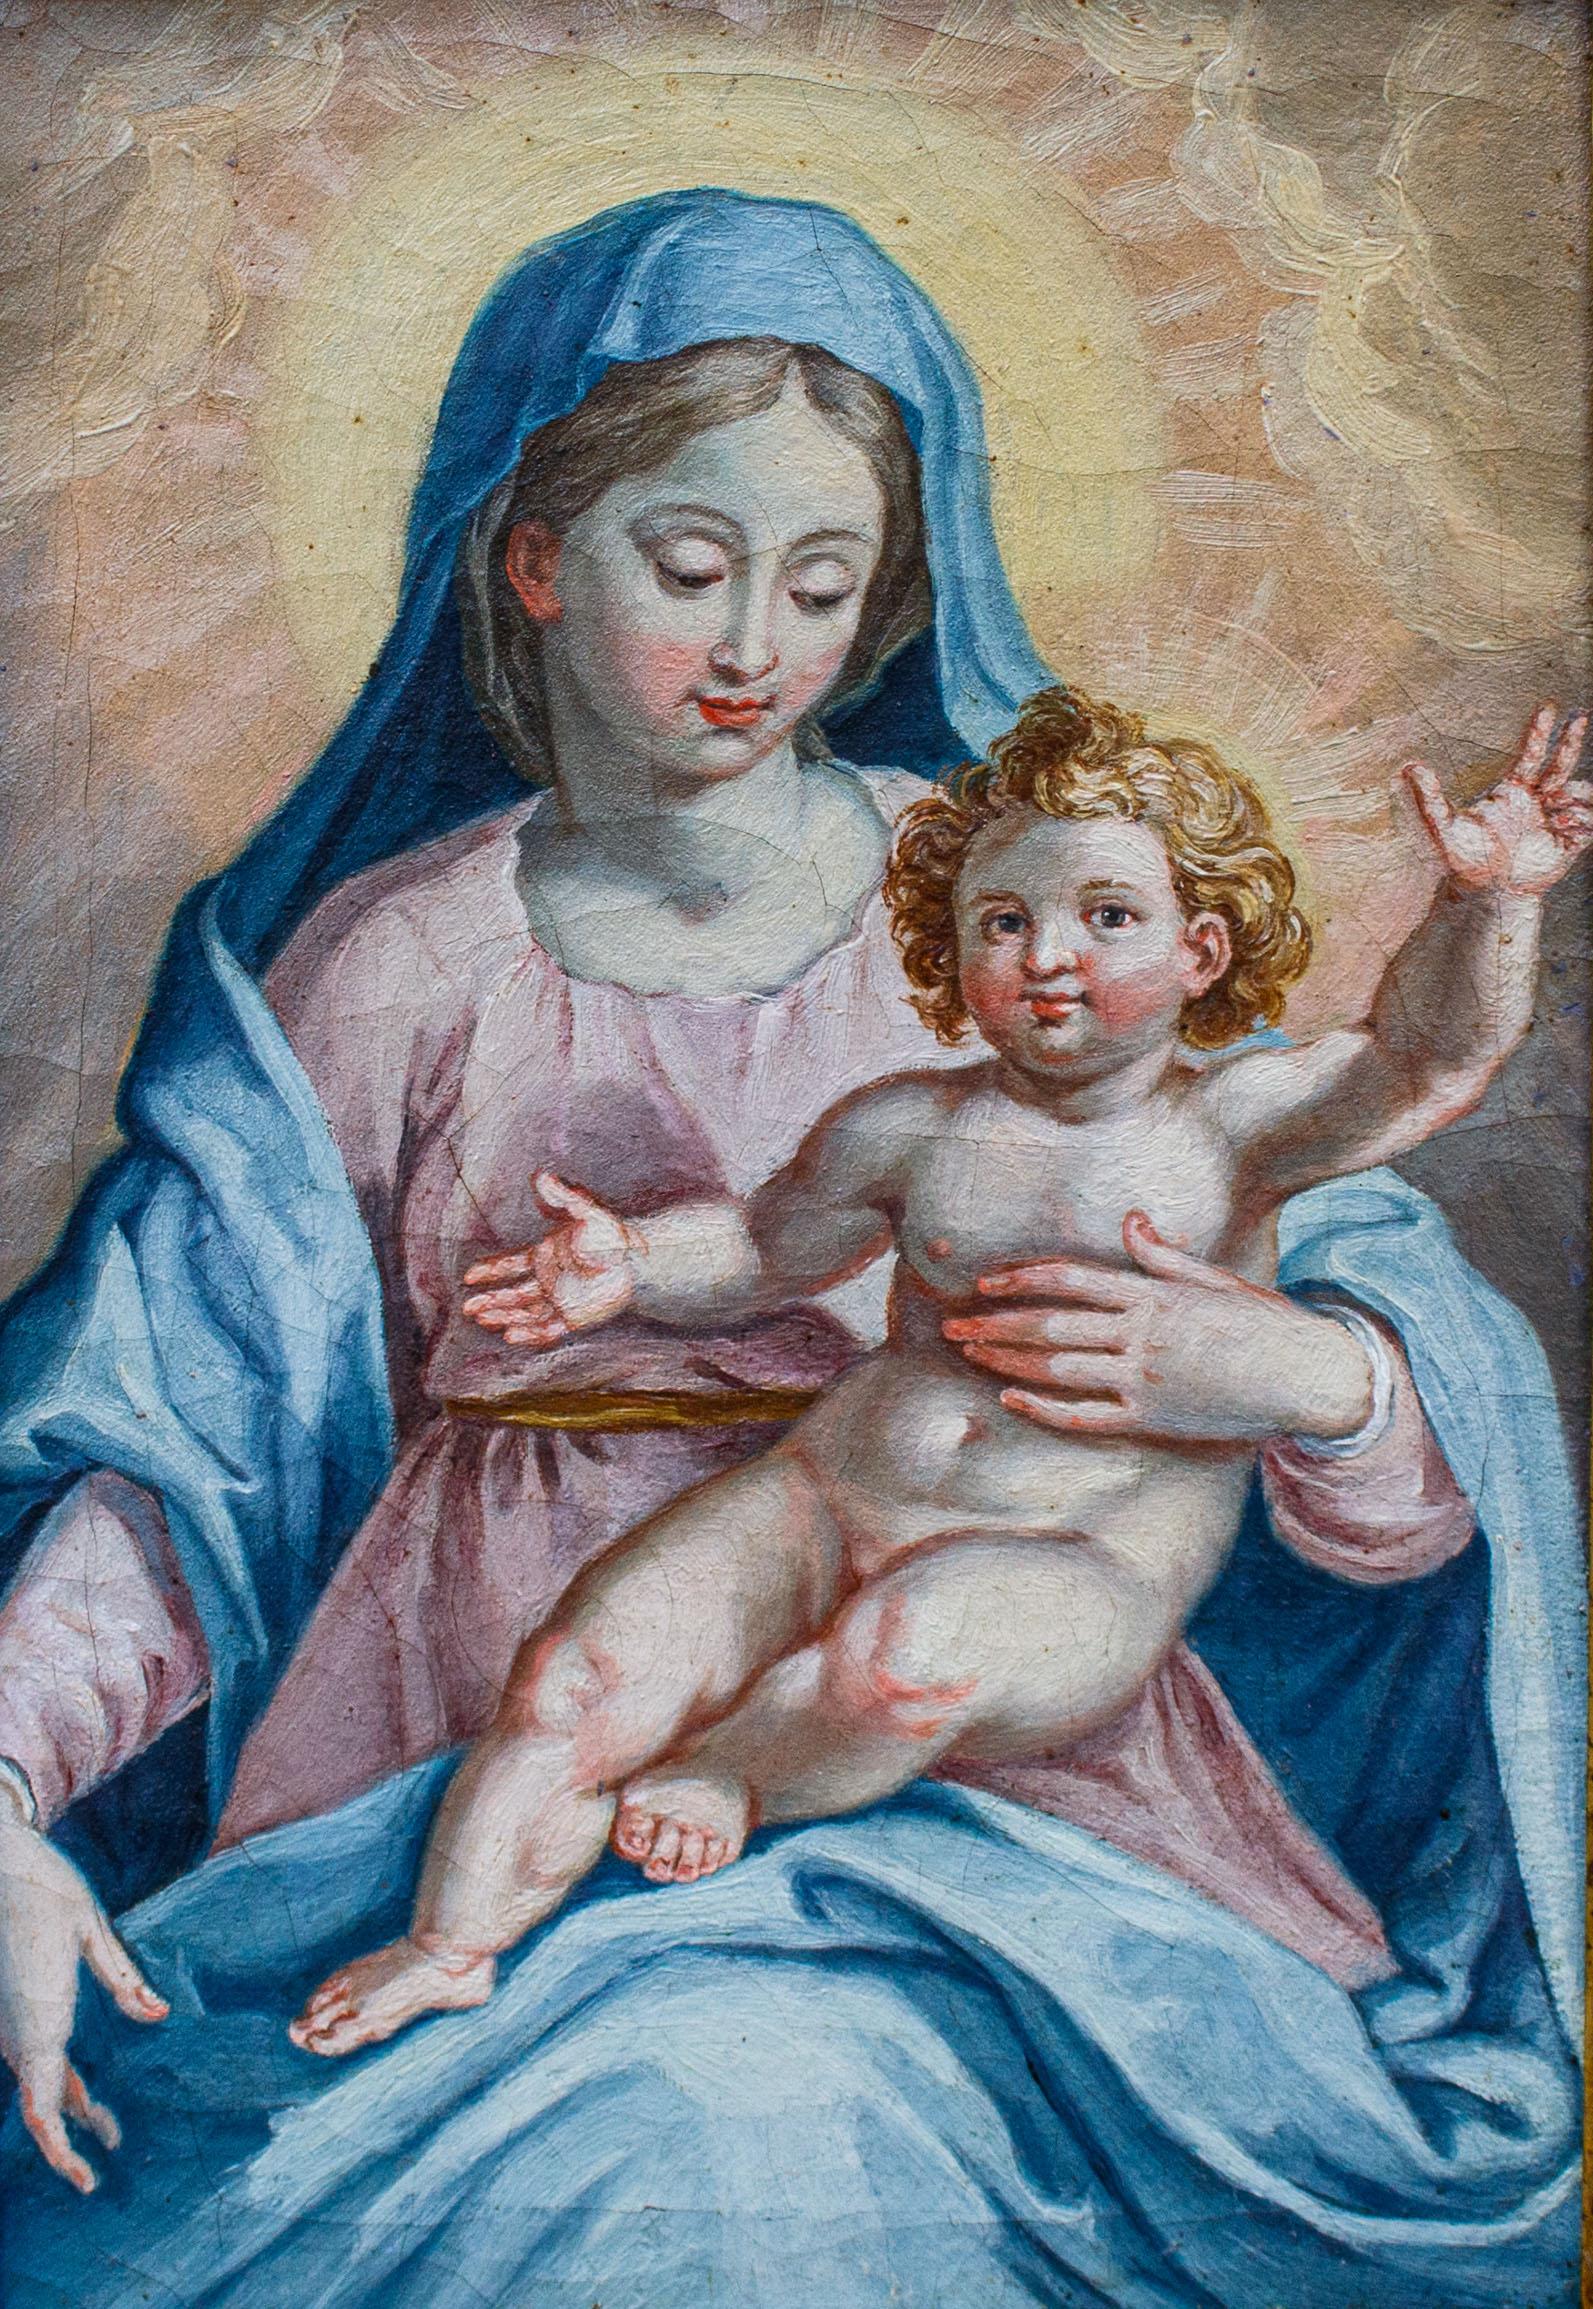 17th century, Tuscan school

Madonna and Child

Oil on canvas, 31 x 21 cm

With frame, cm 37,5 x 27,5

The pearly incarnations and the thoughtful play of looks between the Virgin, turned to the Son, and Questi, warmly open to the viewer,